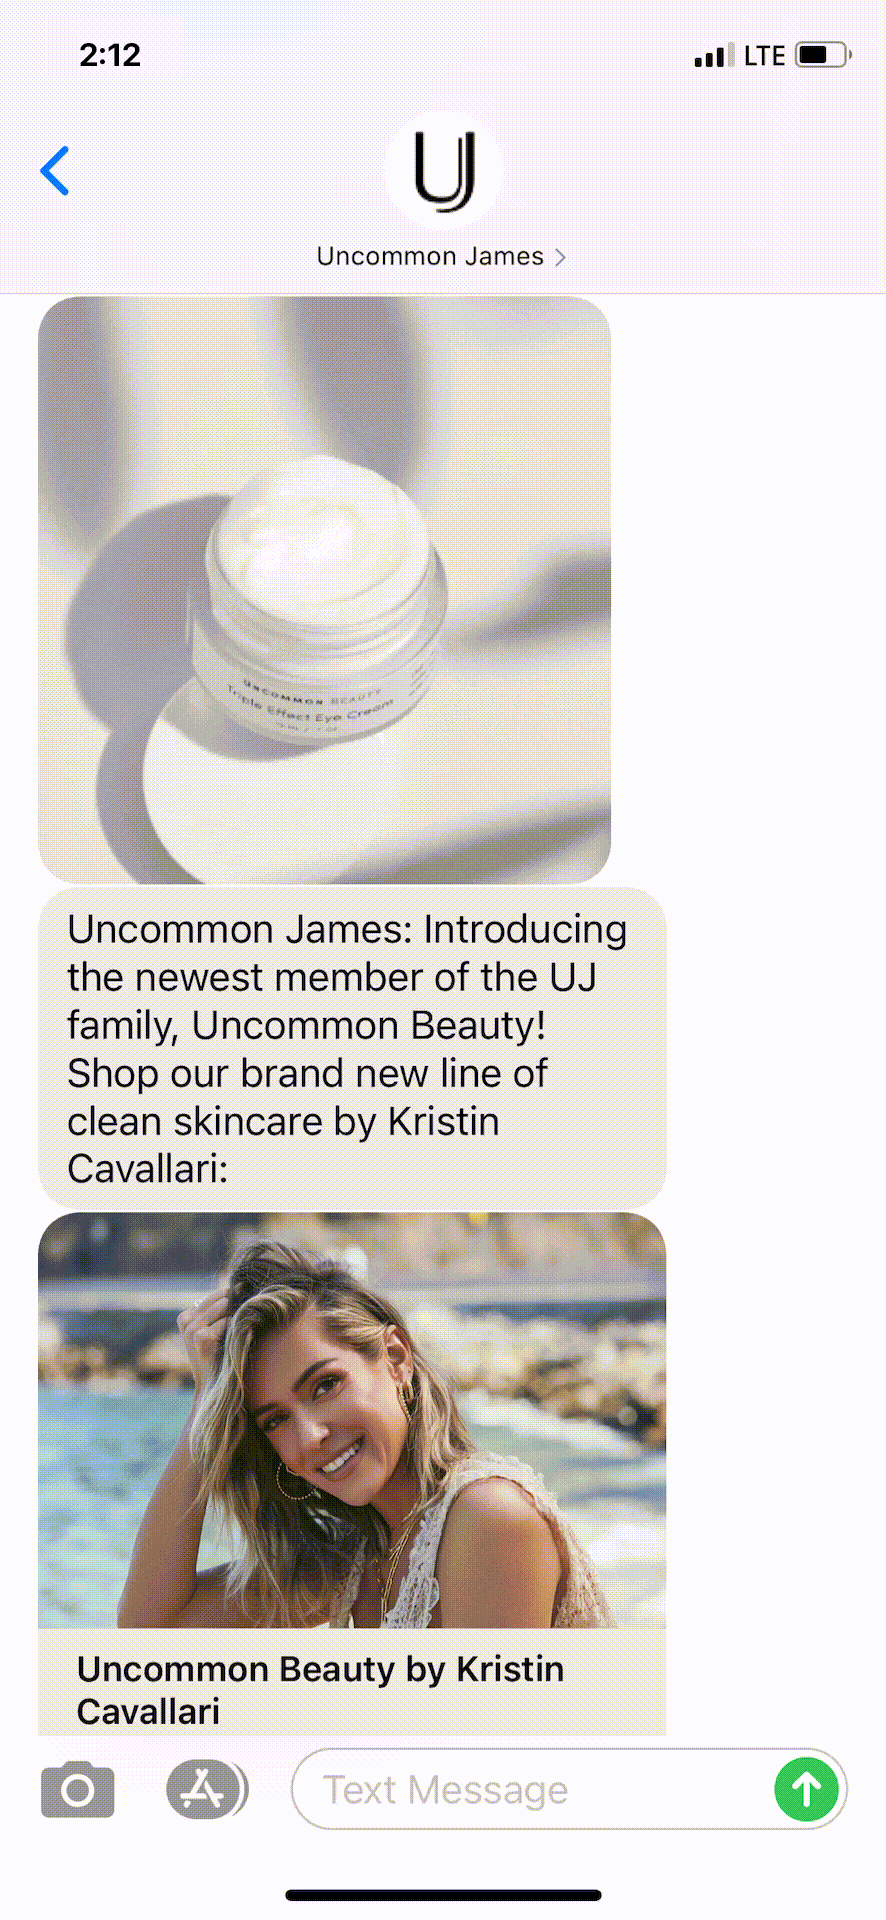 Uncommon-James-Text-Message-Marketing-Example-05.13.2021